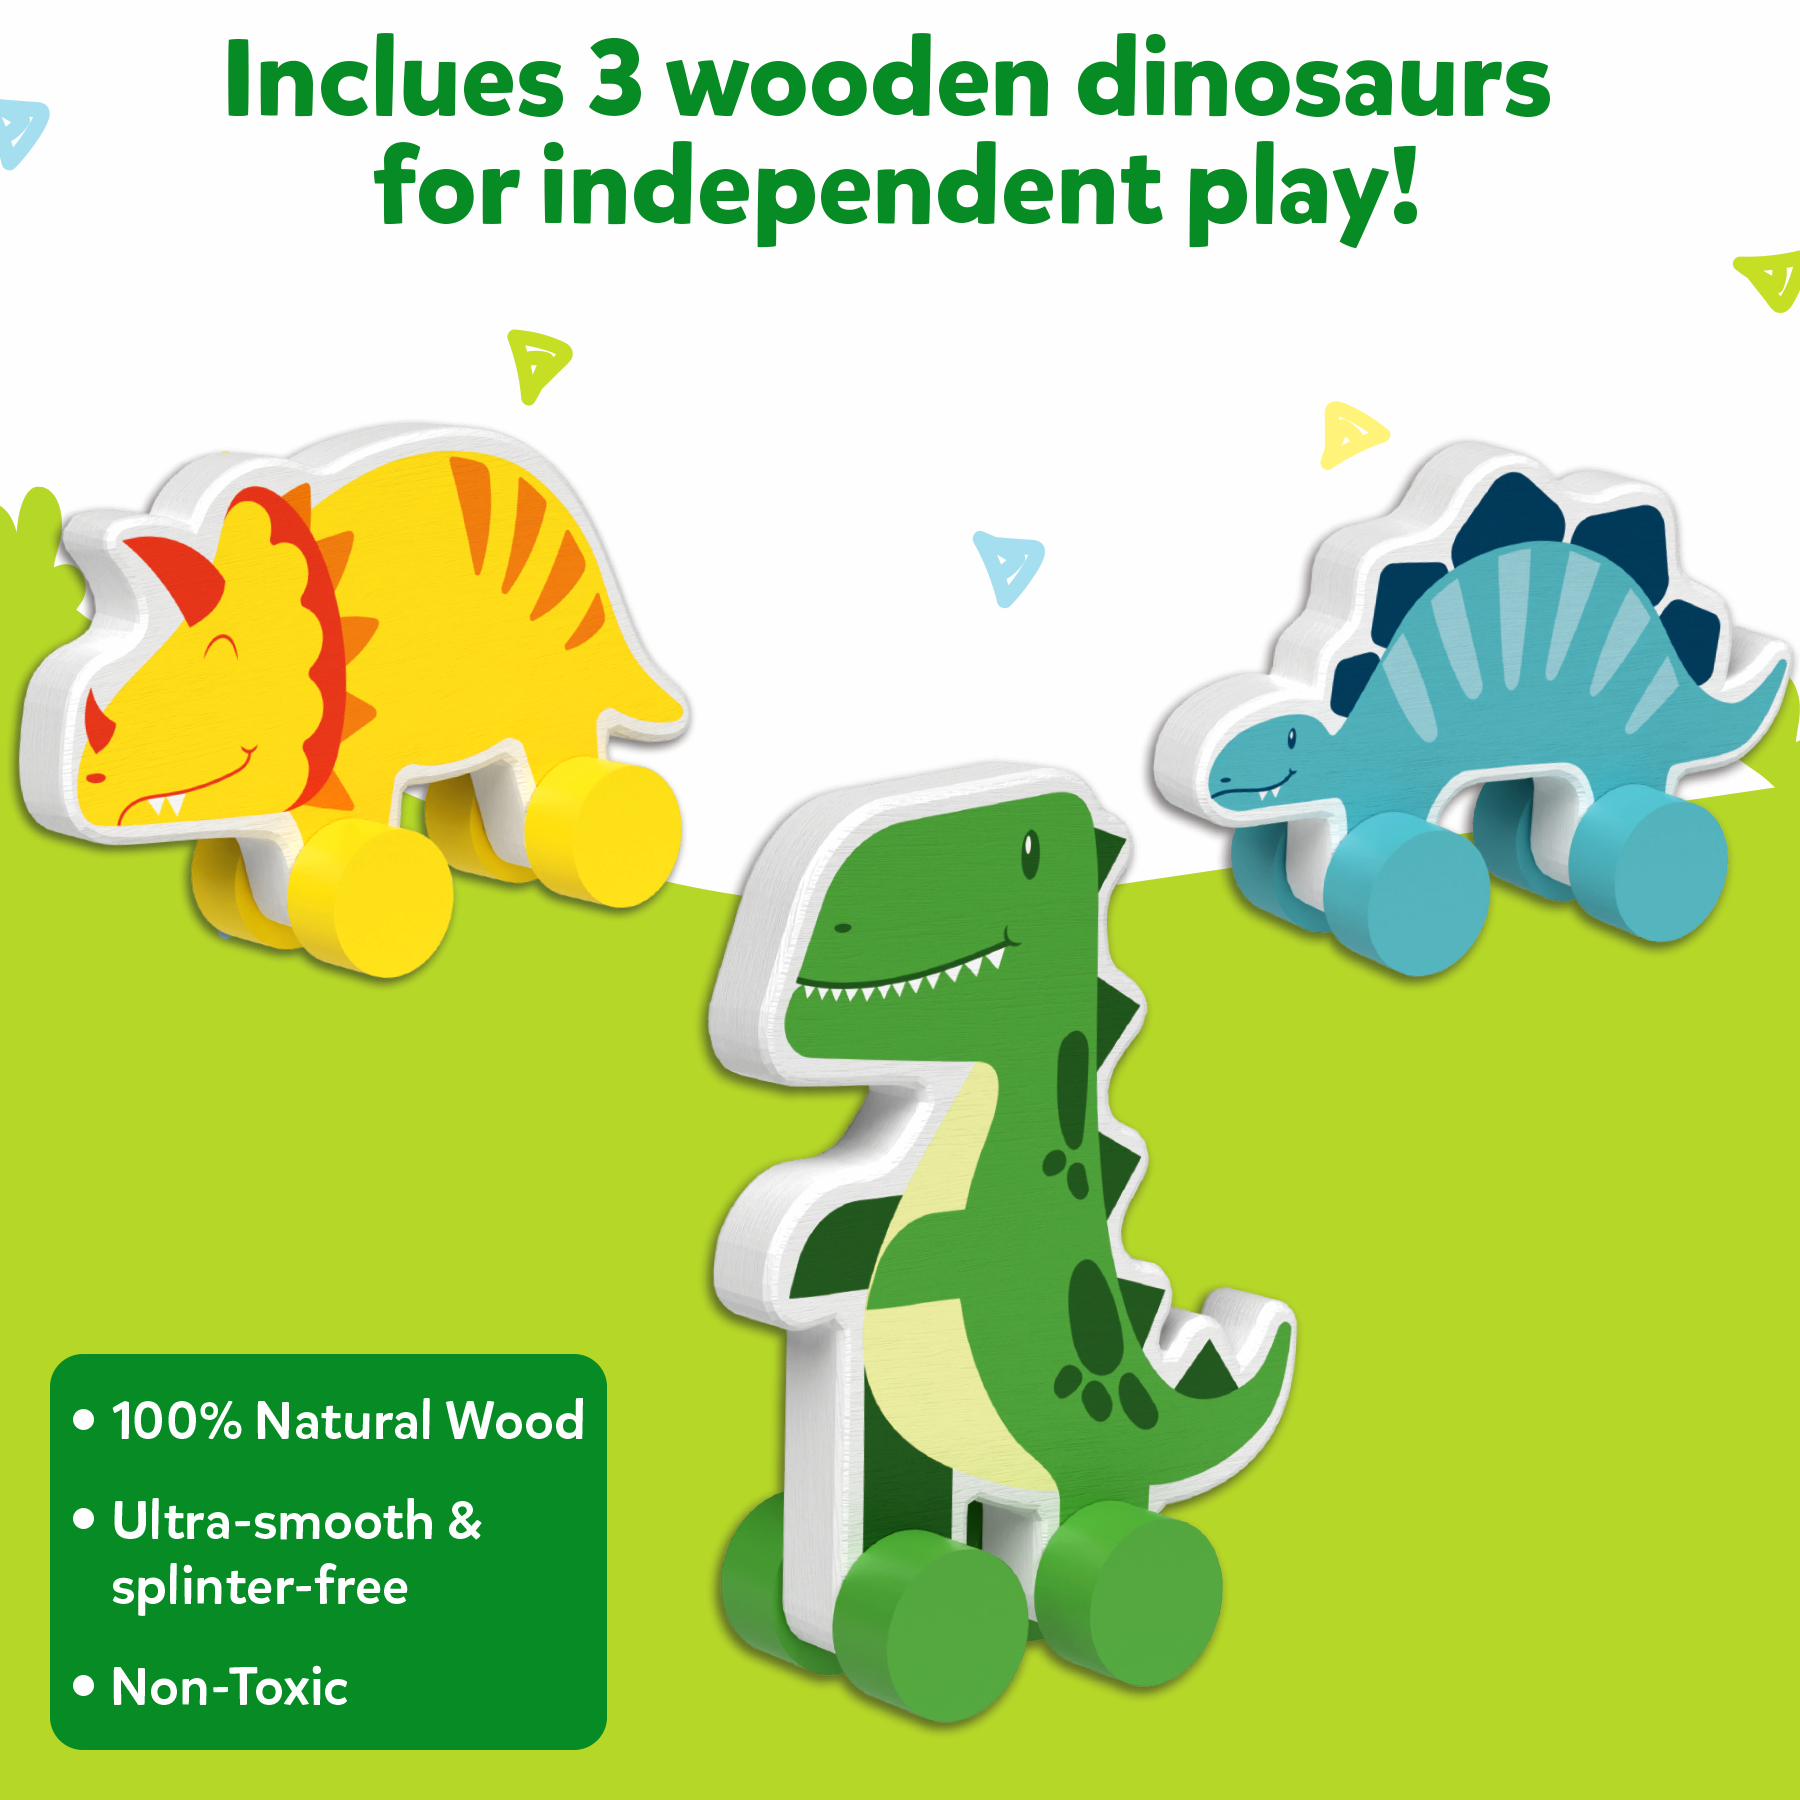 Skillmatics Wooden Dinosaur Toys on Wheels, Imaginative Play for Toddlers, Educational Gifts for Infants 9 Months to 3 Years